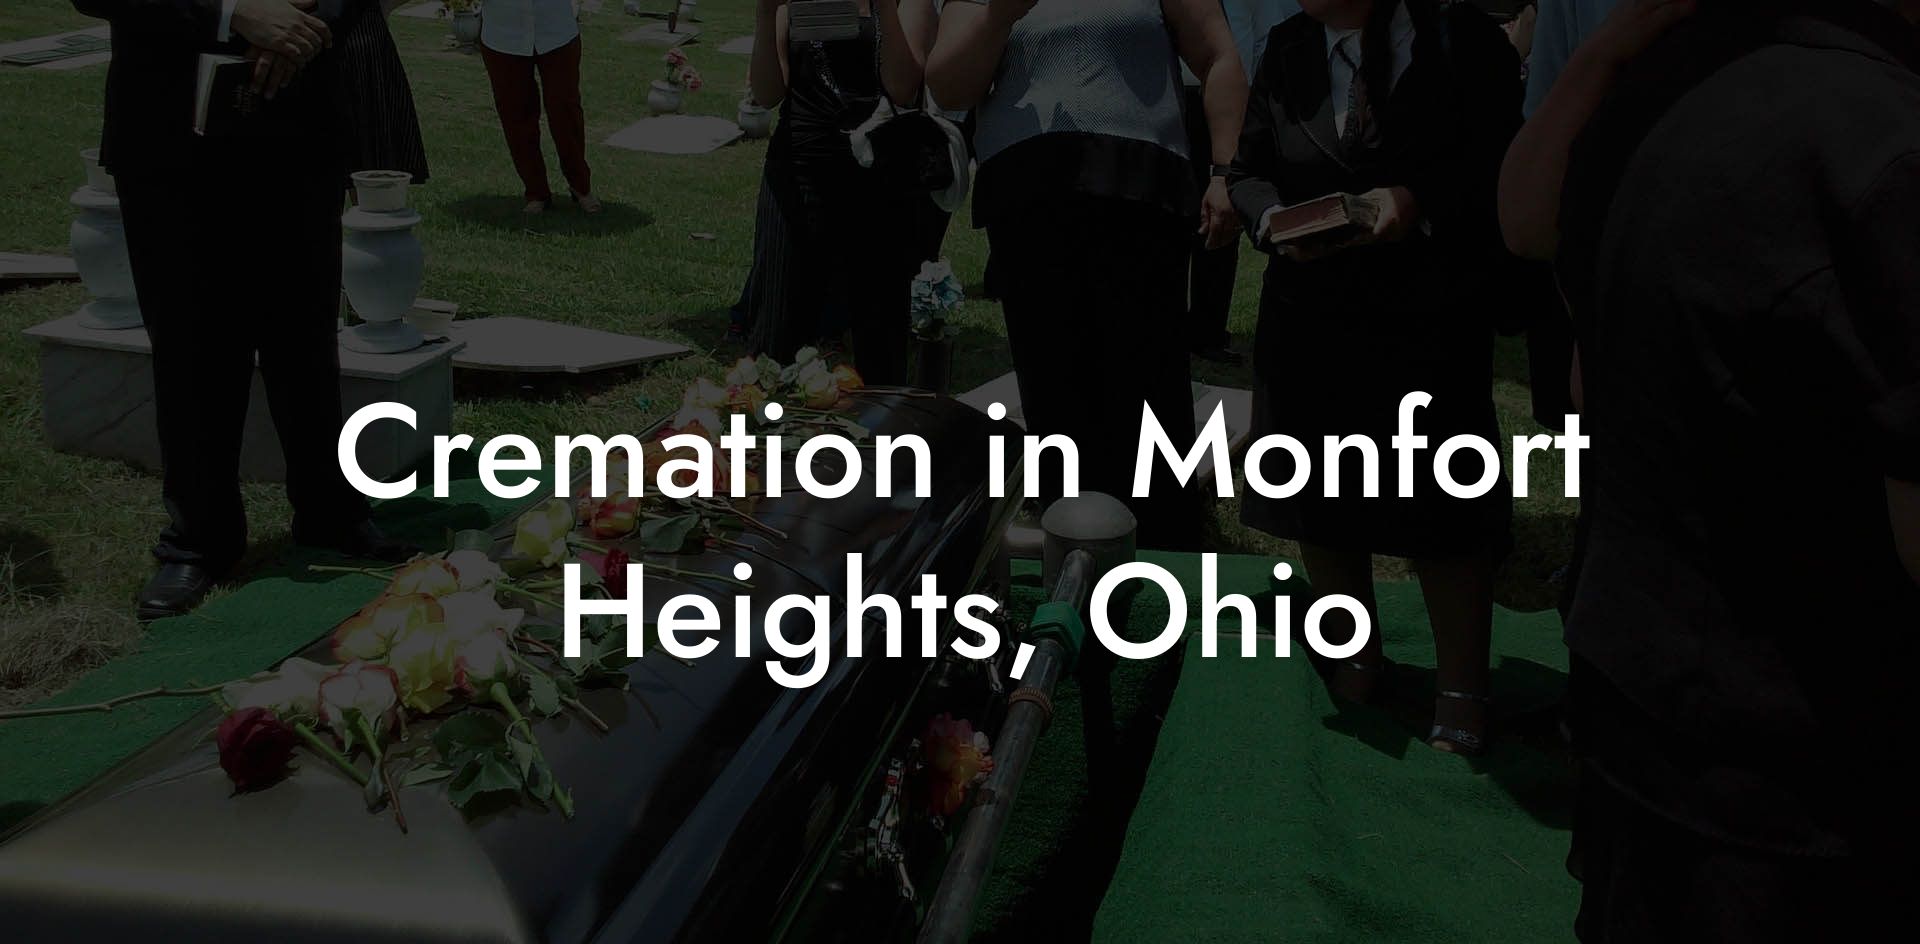 Cremation in Monfort Heights, Ohio